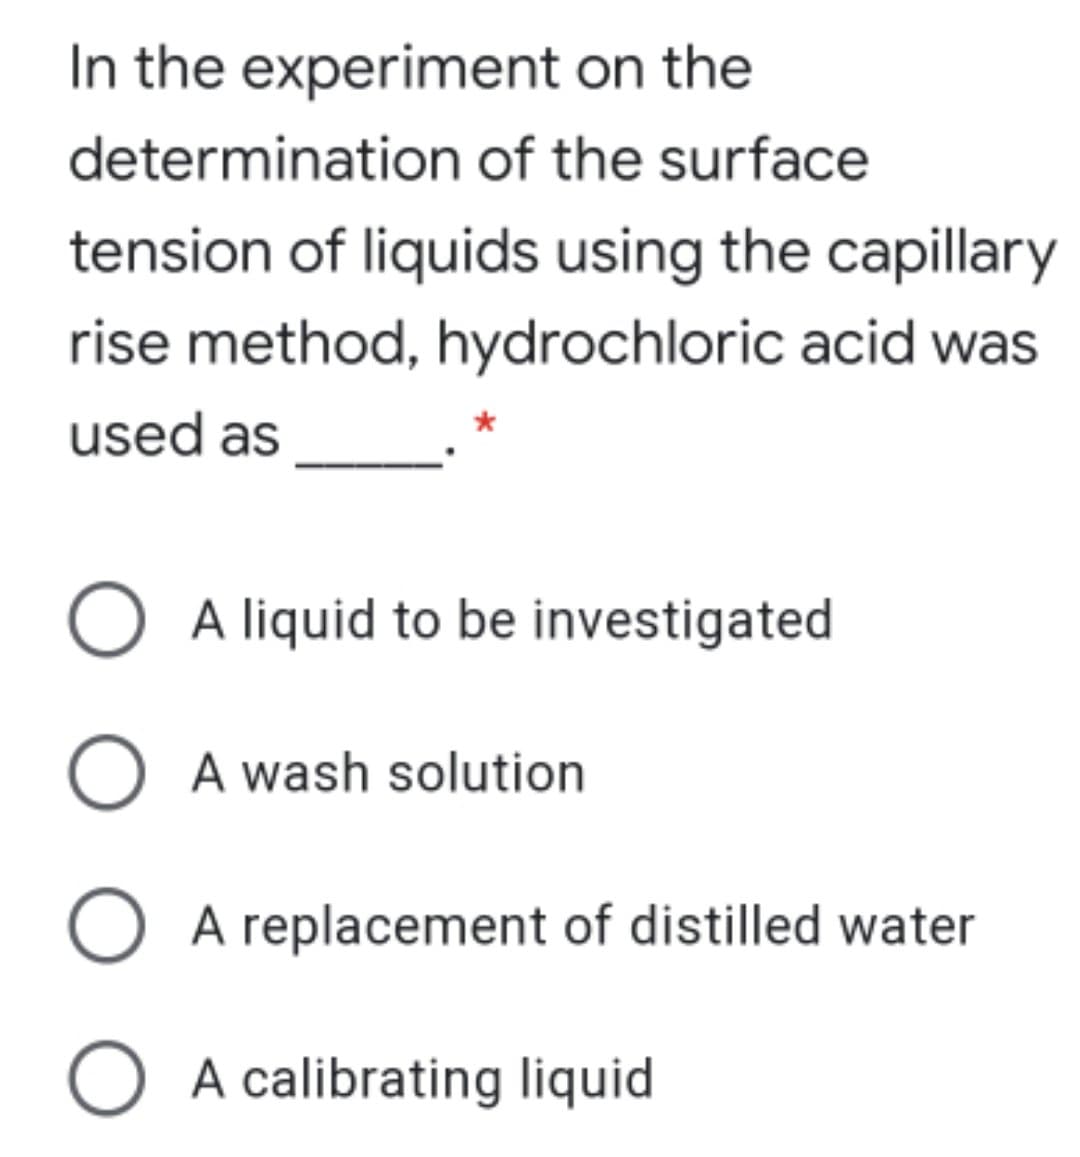 In the experiment on the
determination of the surface
tension of liquids using the capillary
rise method, hydrochloric acid was
used as
A liquid to be investigated
A wash solution
O A replacement of distilled water
O A calibrating liquid
